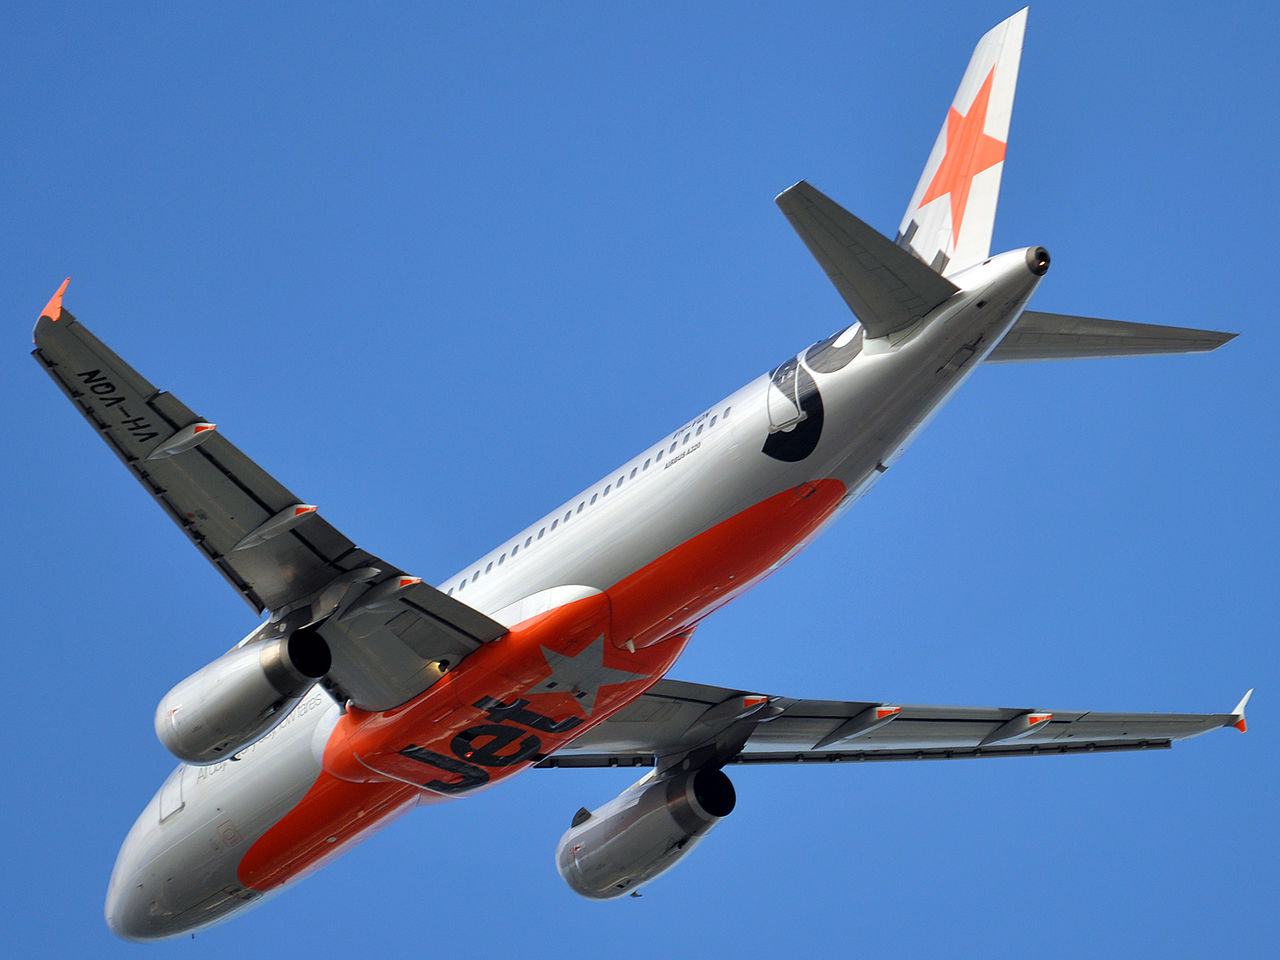 A Jetstar Airbus A320 passes overhead.